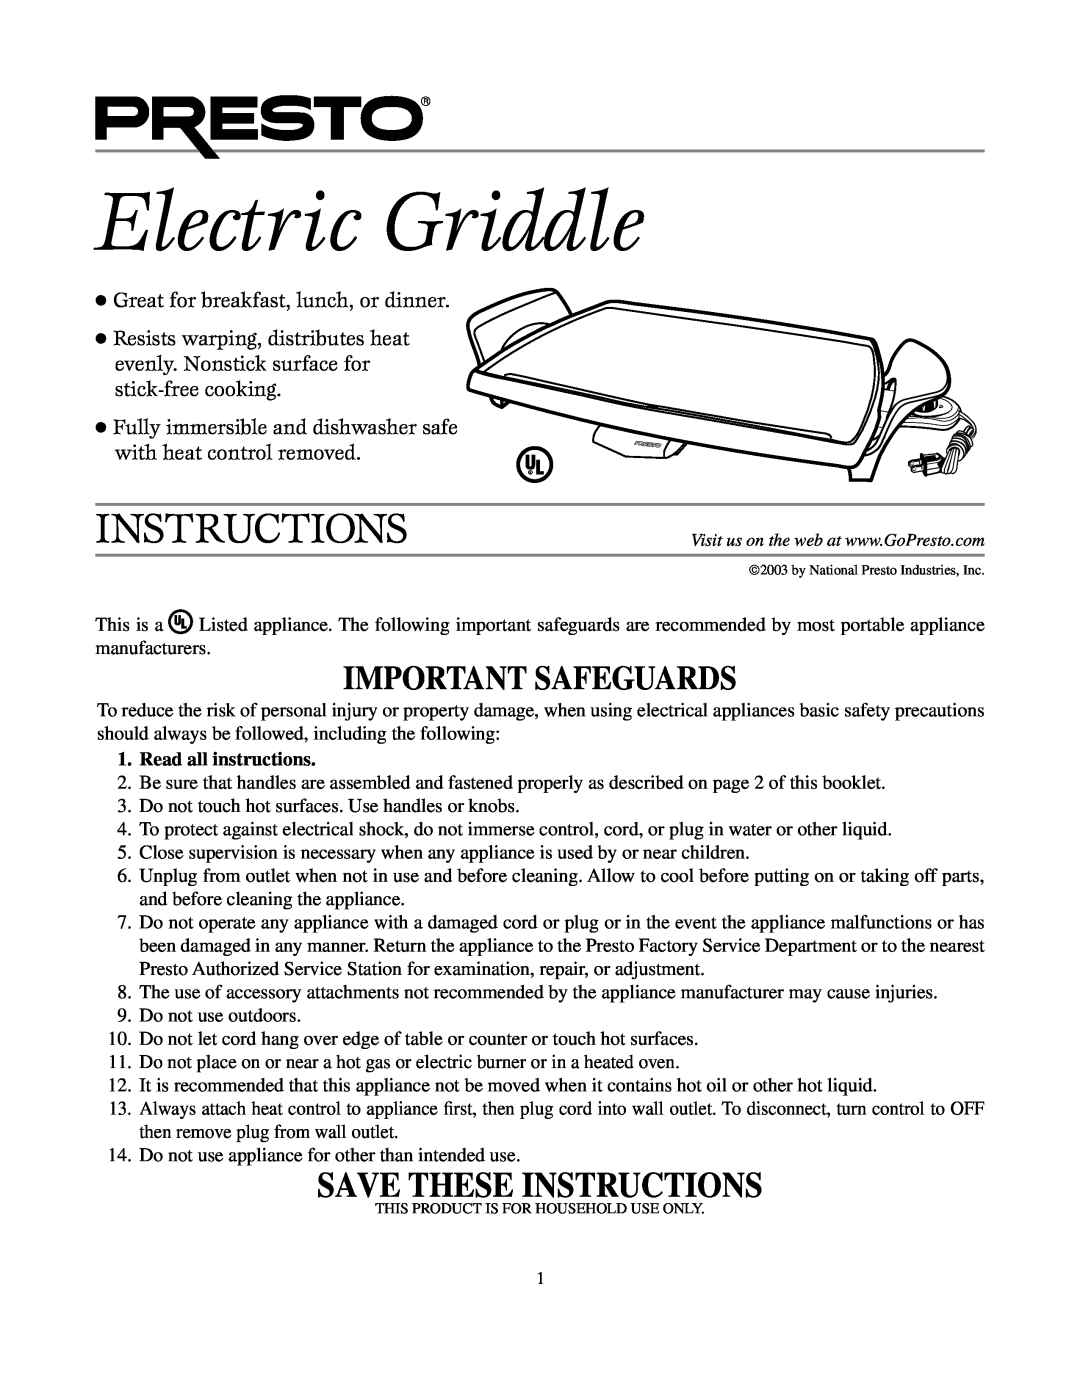 Presto manual Electric Griddle, Save These Instructions, Important Safeguards, Read all instructions 